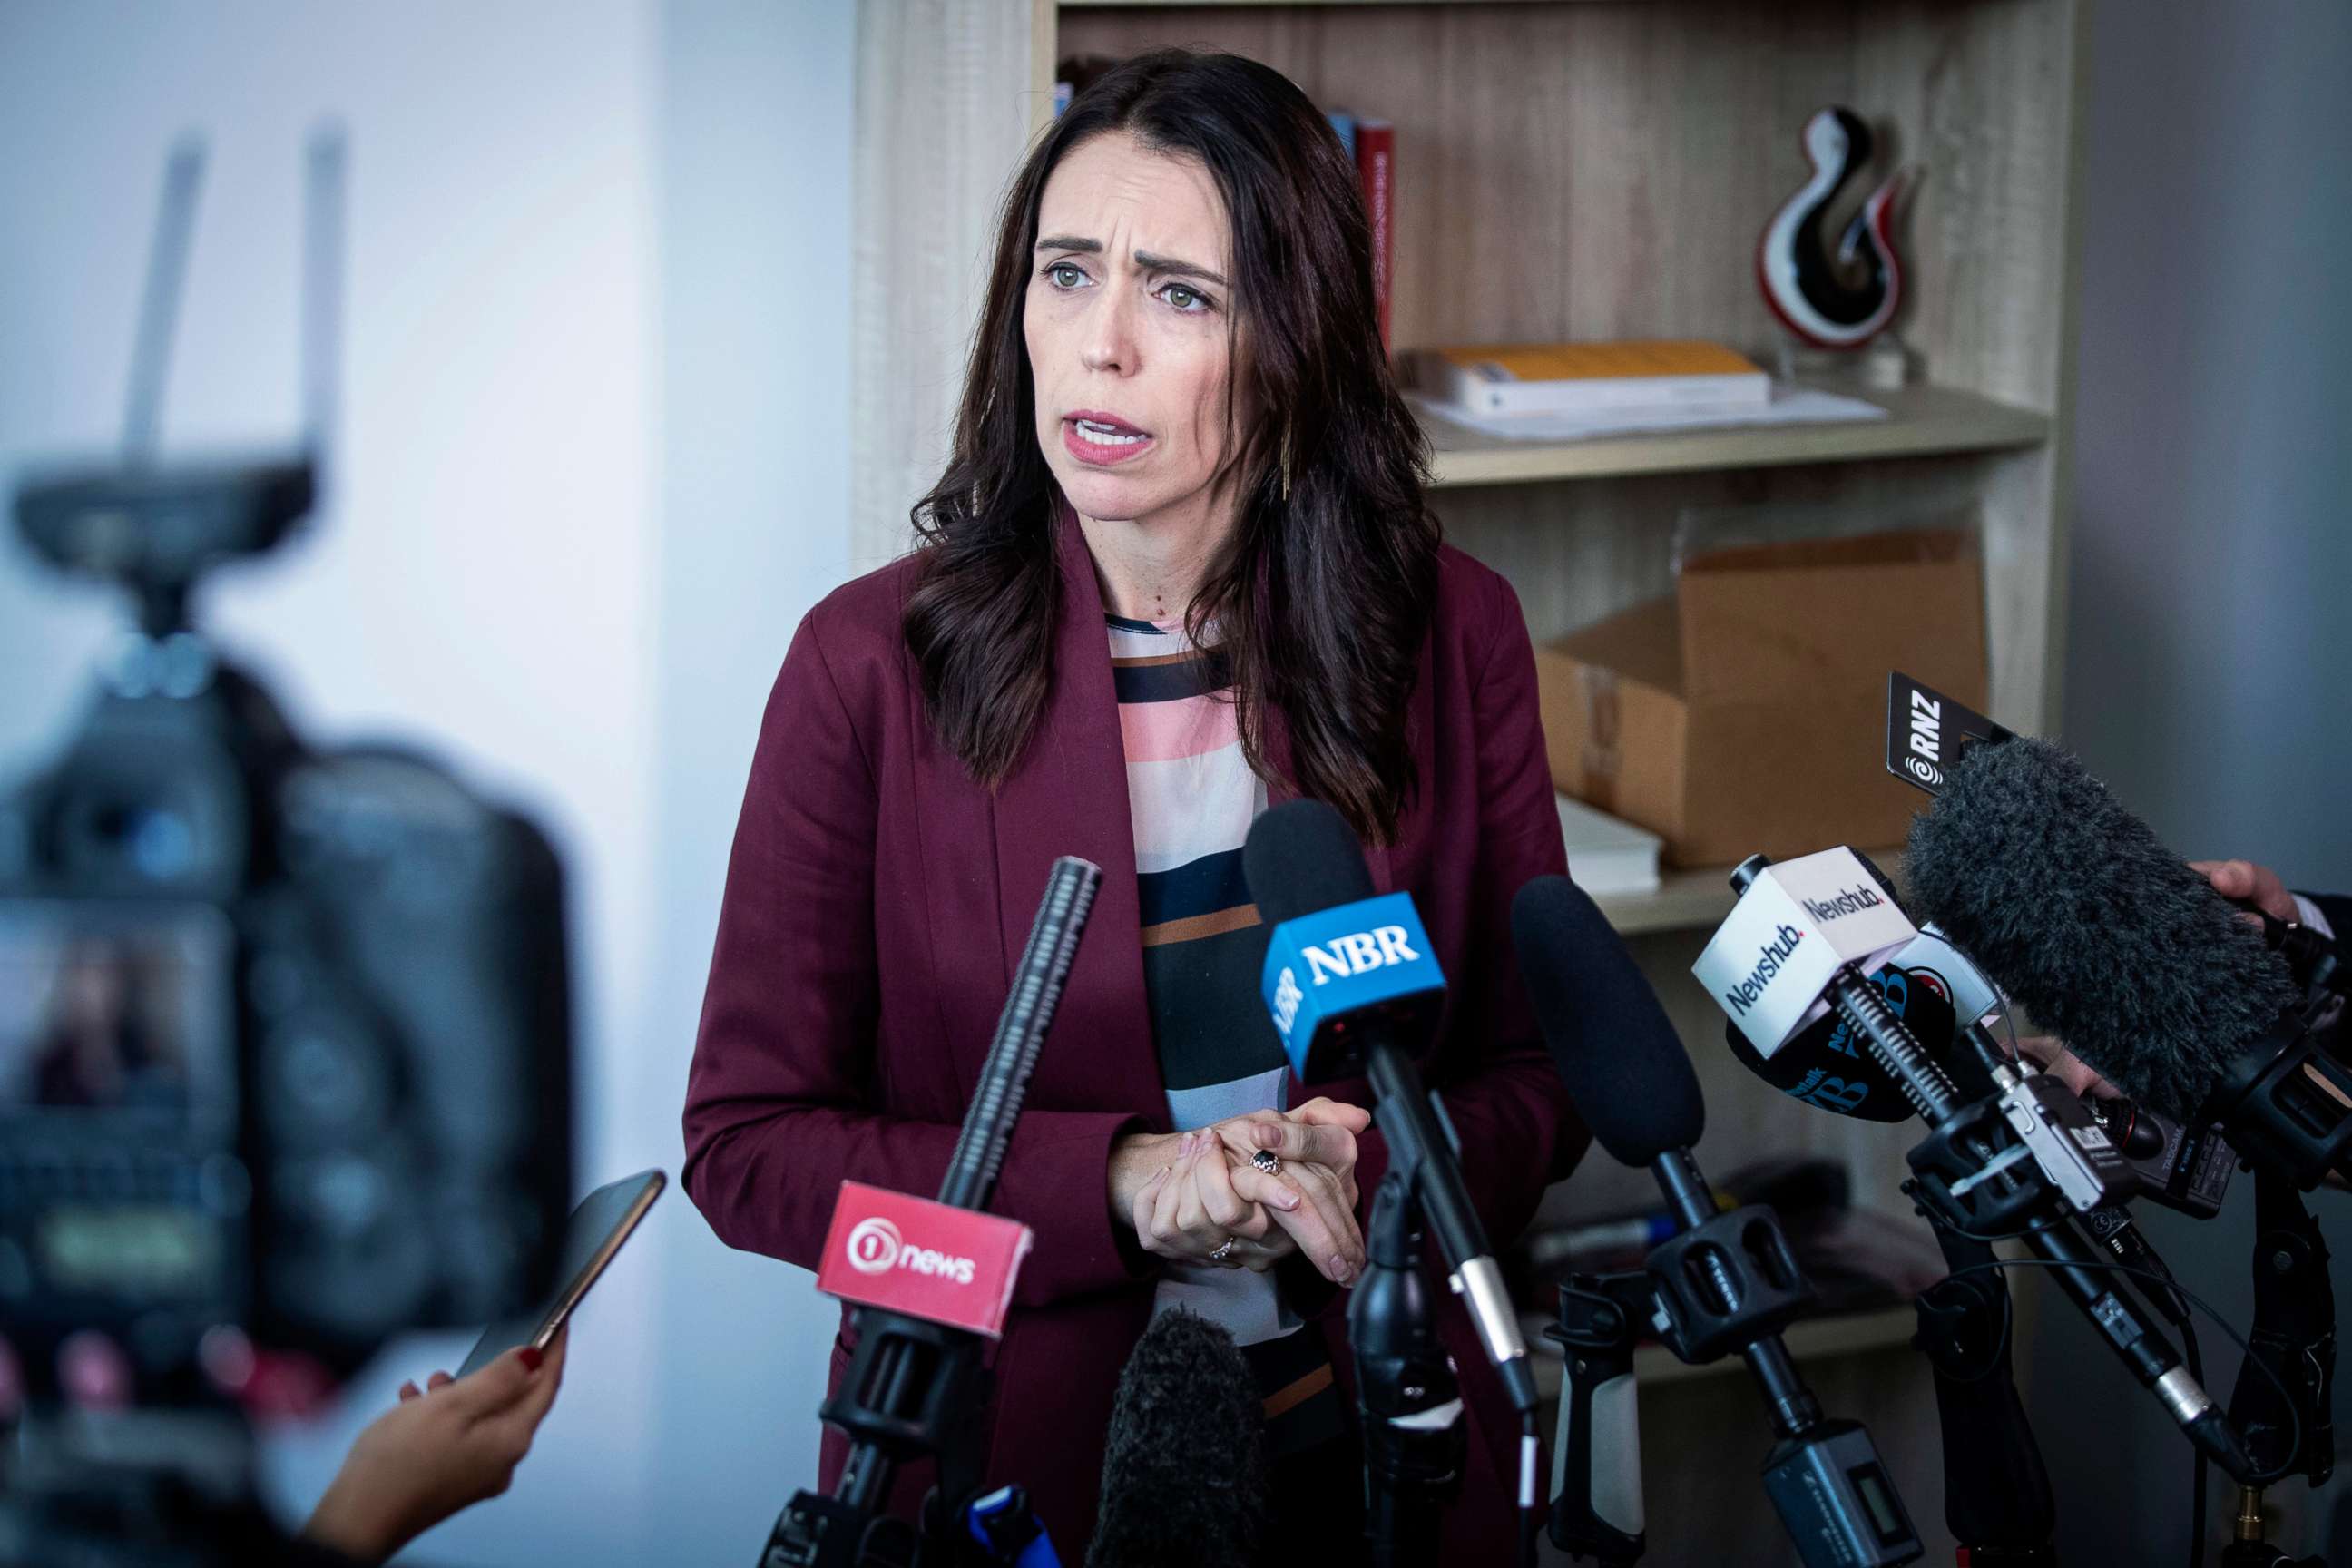 PHOTO: New Zealand Prime Minister Jacinda Ardern speaks to media at her electorate office in Aukland, April 24, 2019.